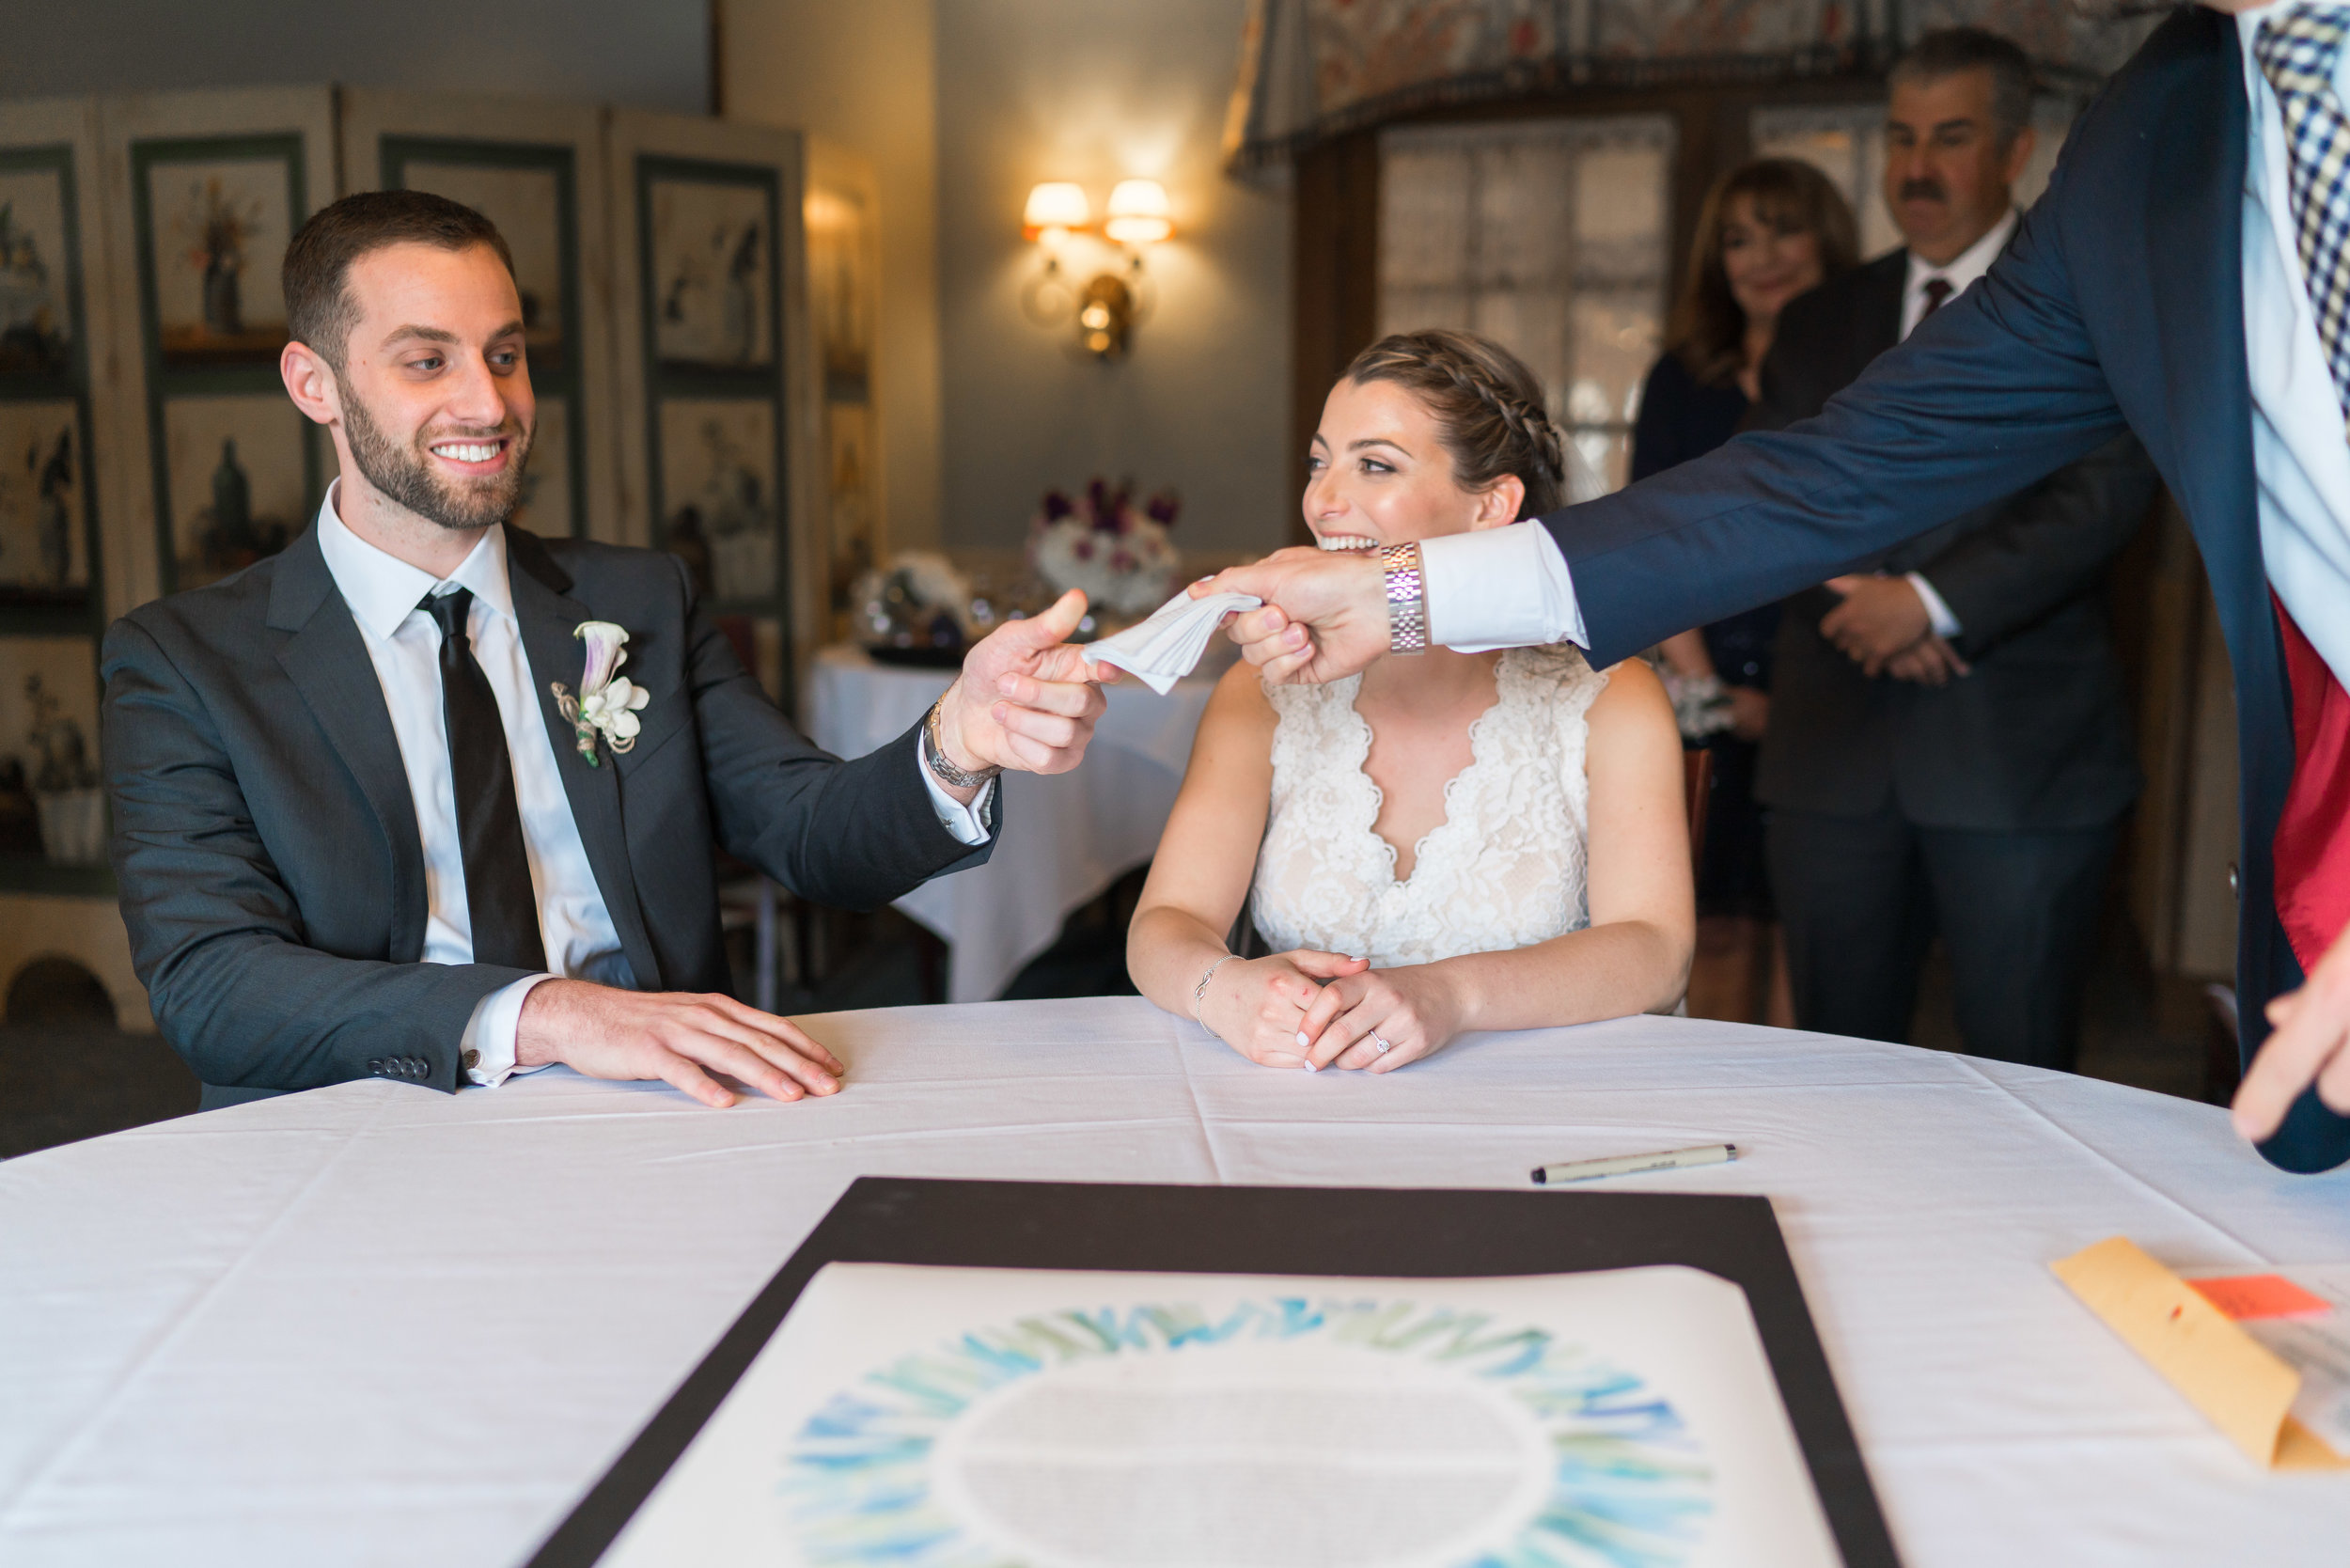 Ketubah signing in upstairs at La Ferme wedding in Chevy Chase